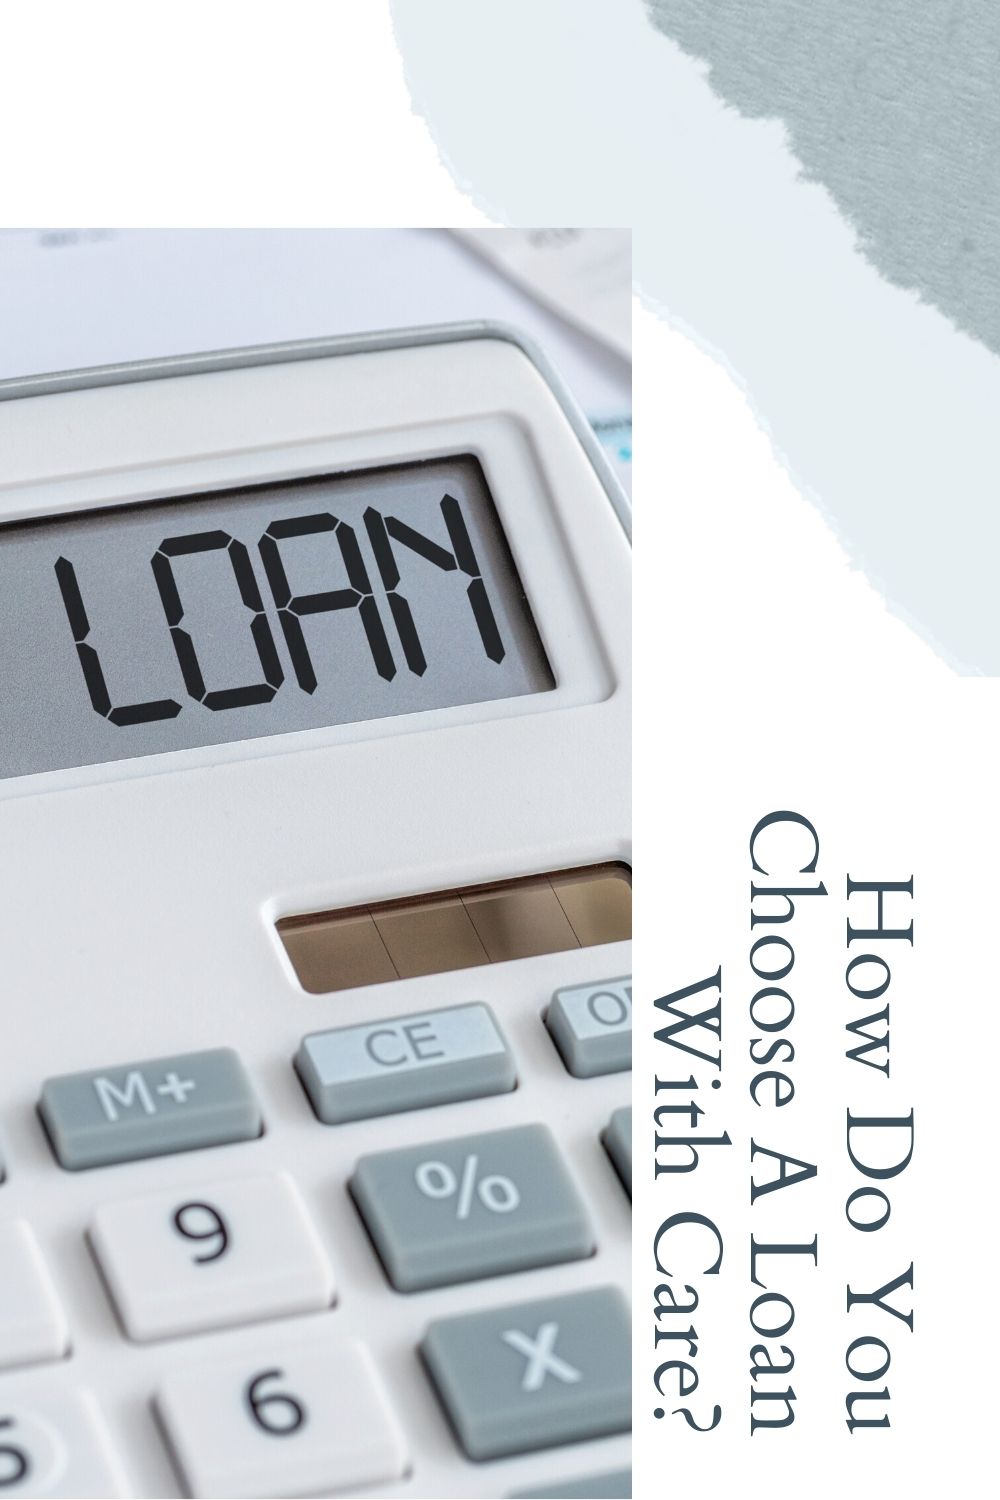 How Do You Choose A Loan With Care